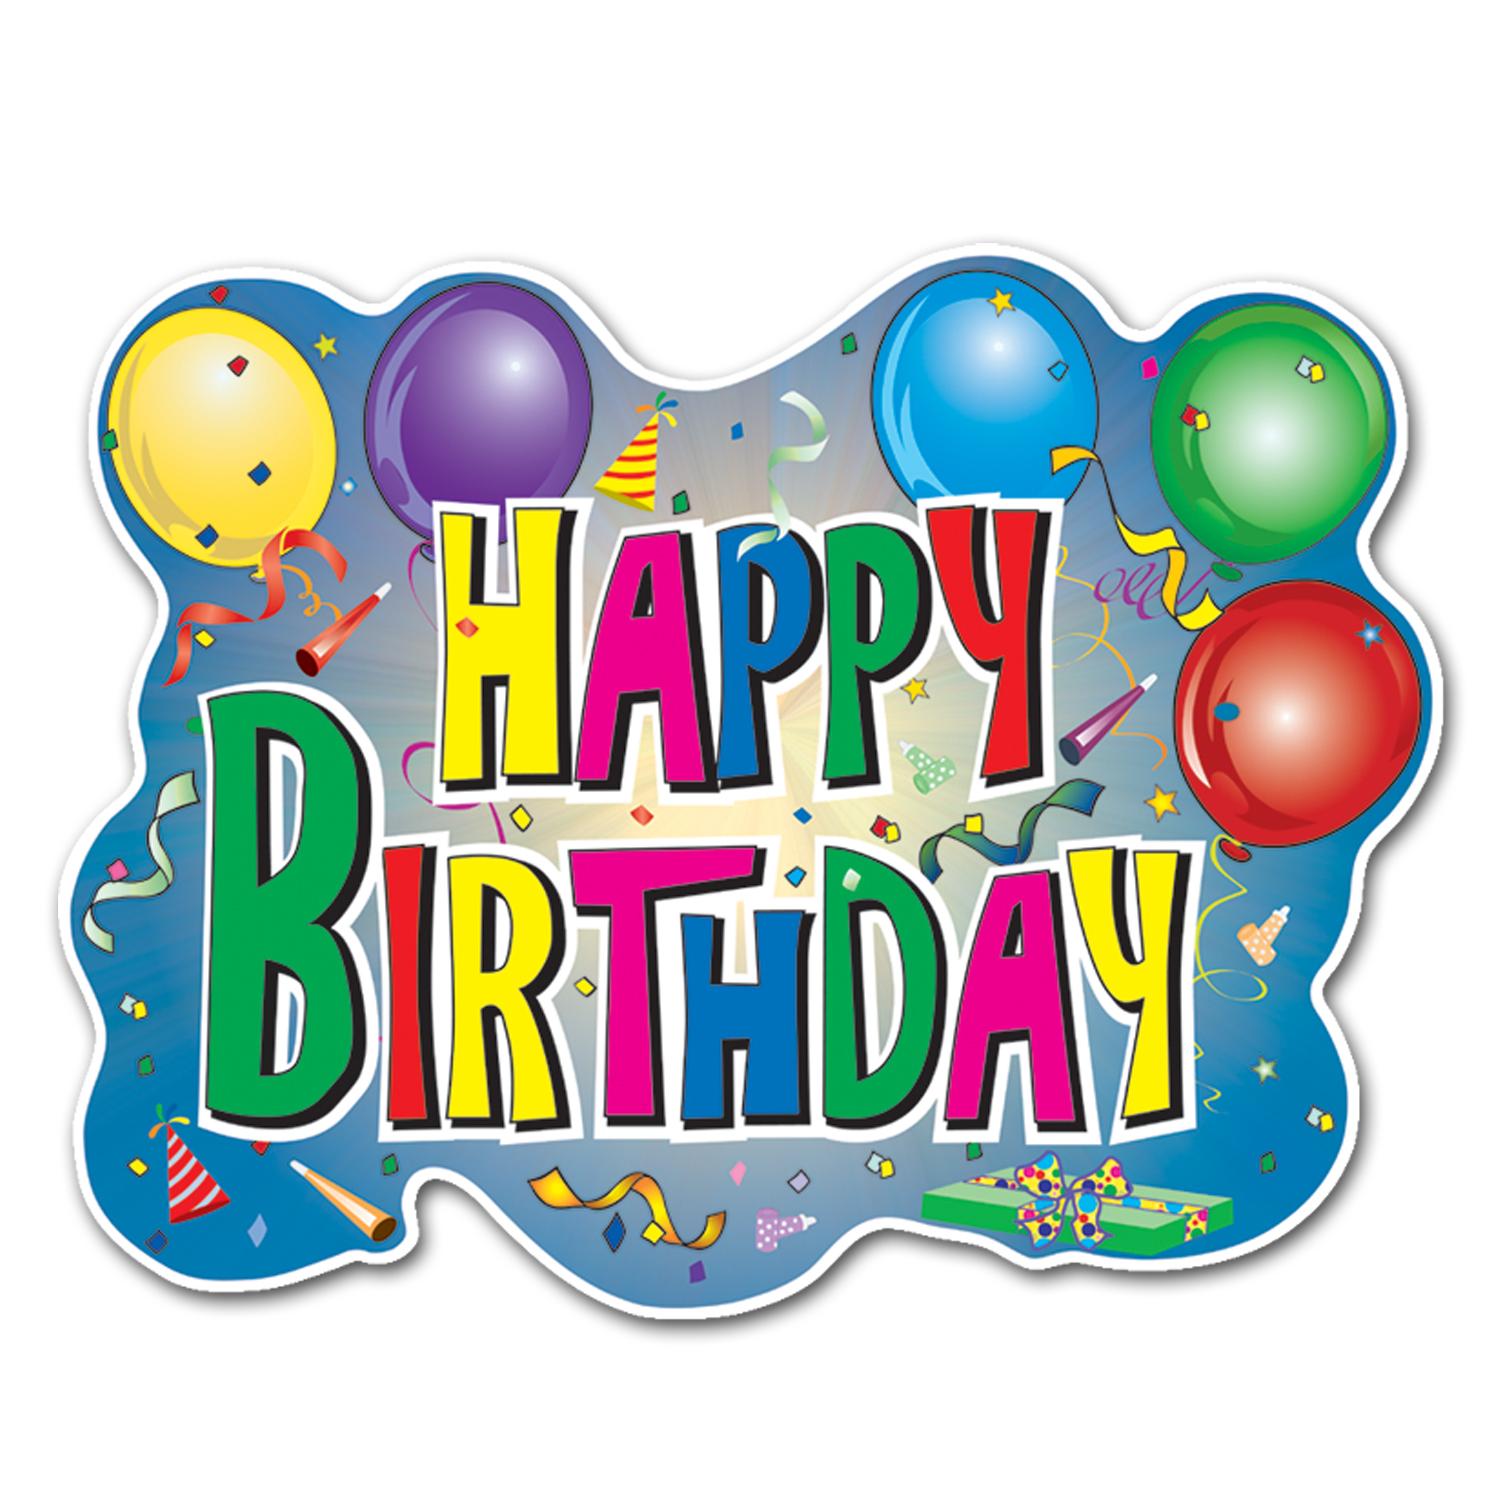 Birthday Printable Images Gallery Category Page 5